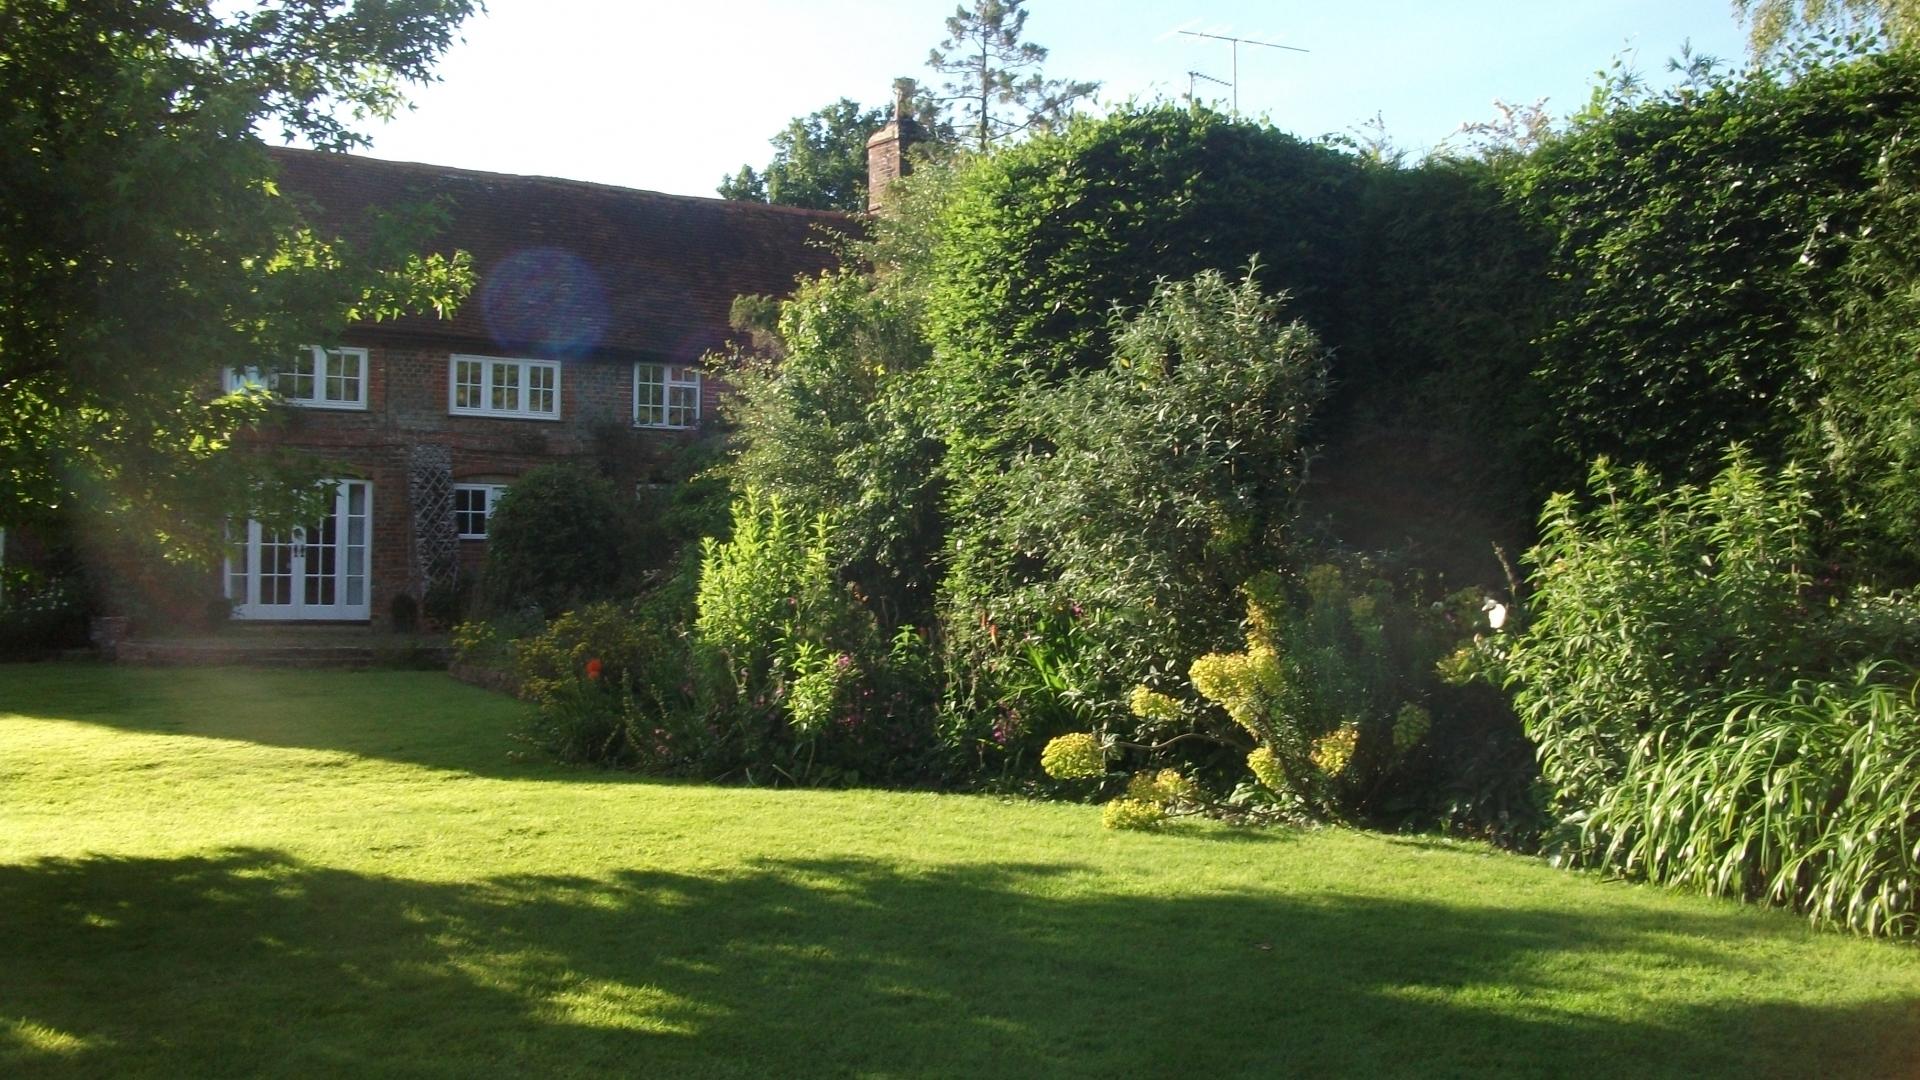 2 Bedroom Cottage/shared facilities in Sussex, United Kingdom